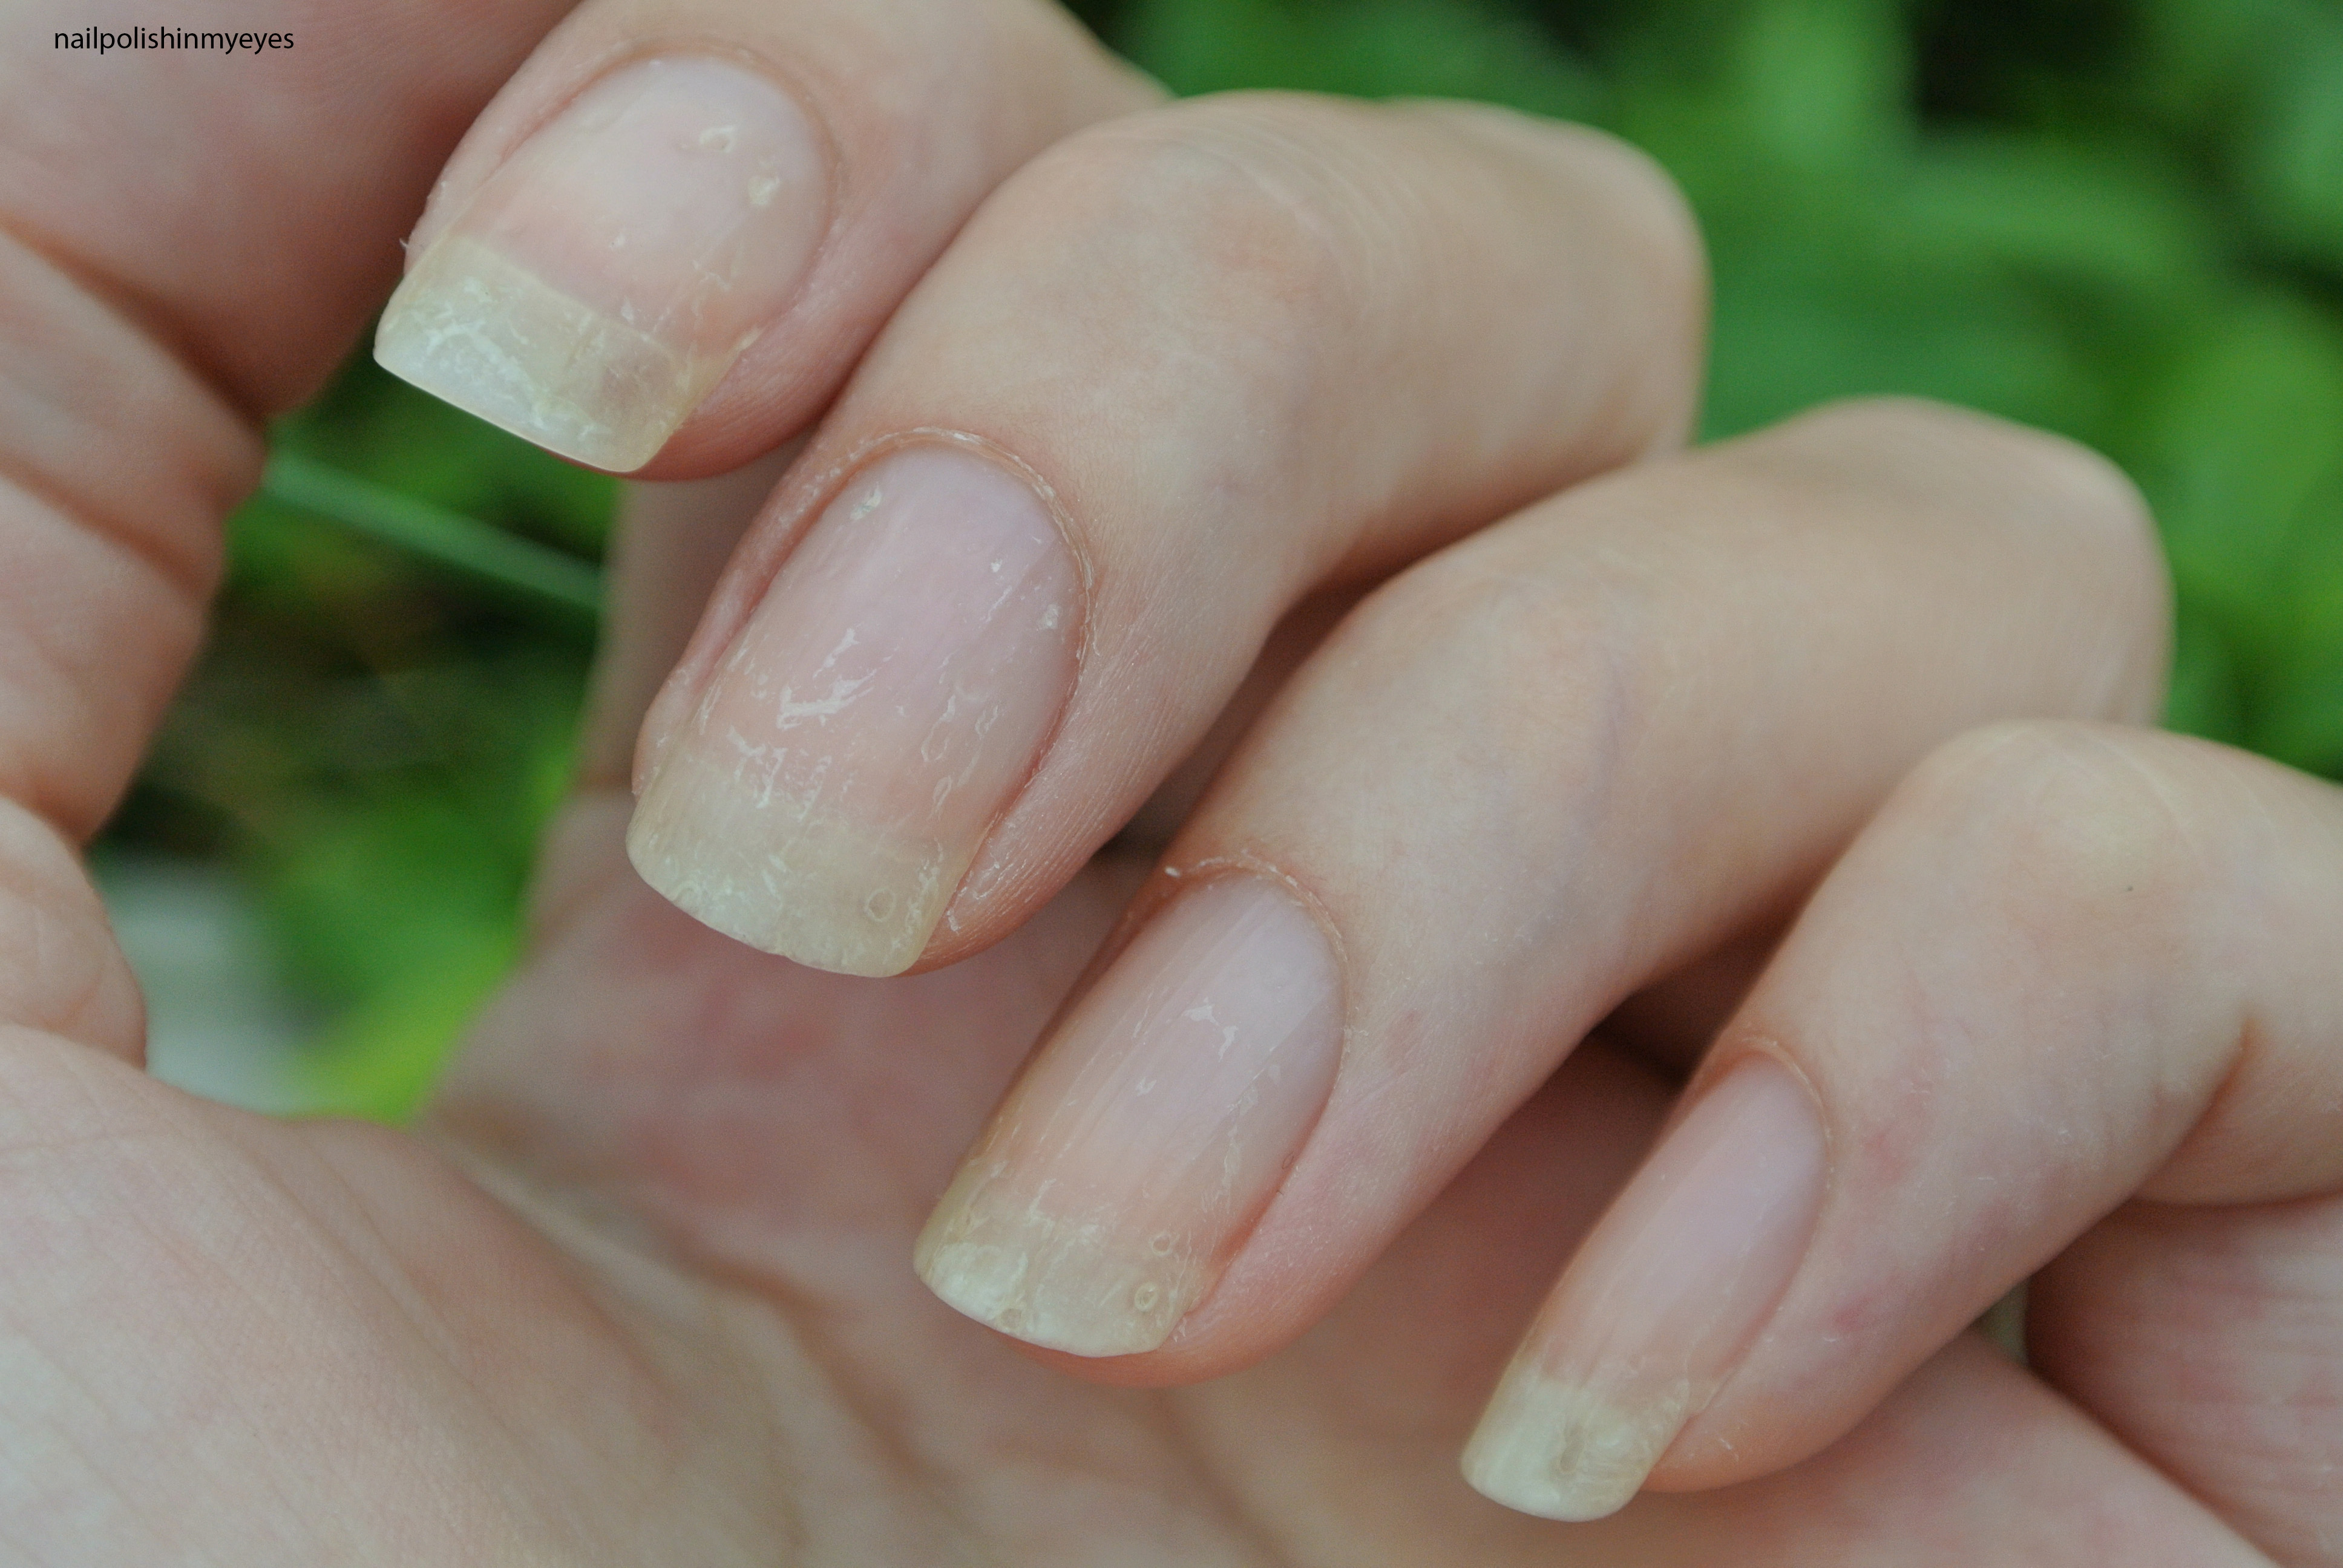 How Eczema Affected My Nails… Nail Polish In My Eyes